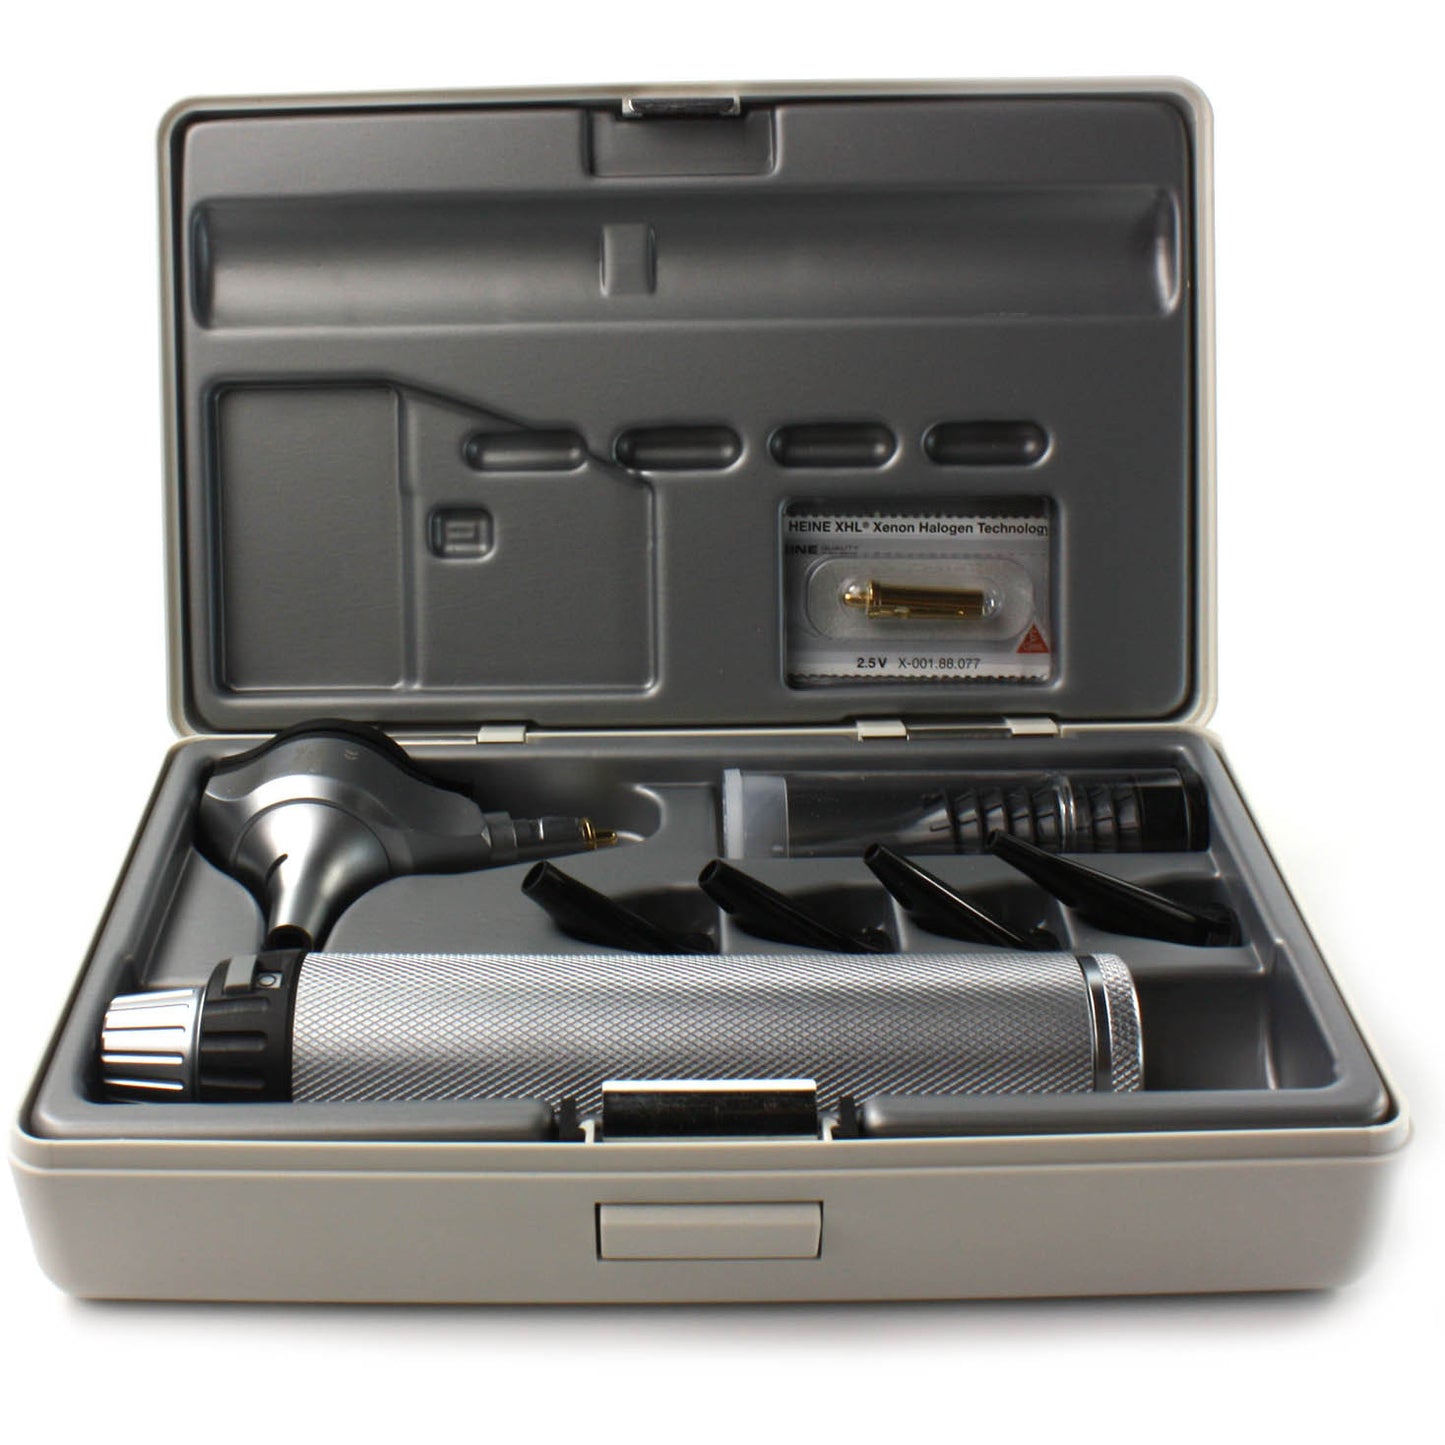 HEINE BETA 200 F.O ENT Otoscope Set with NiMH Handle & NT300 Charger